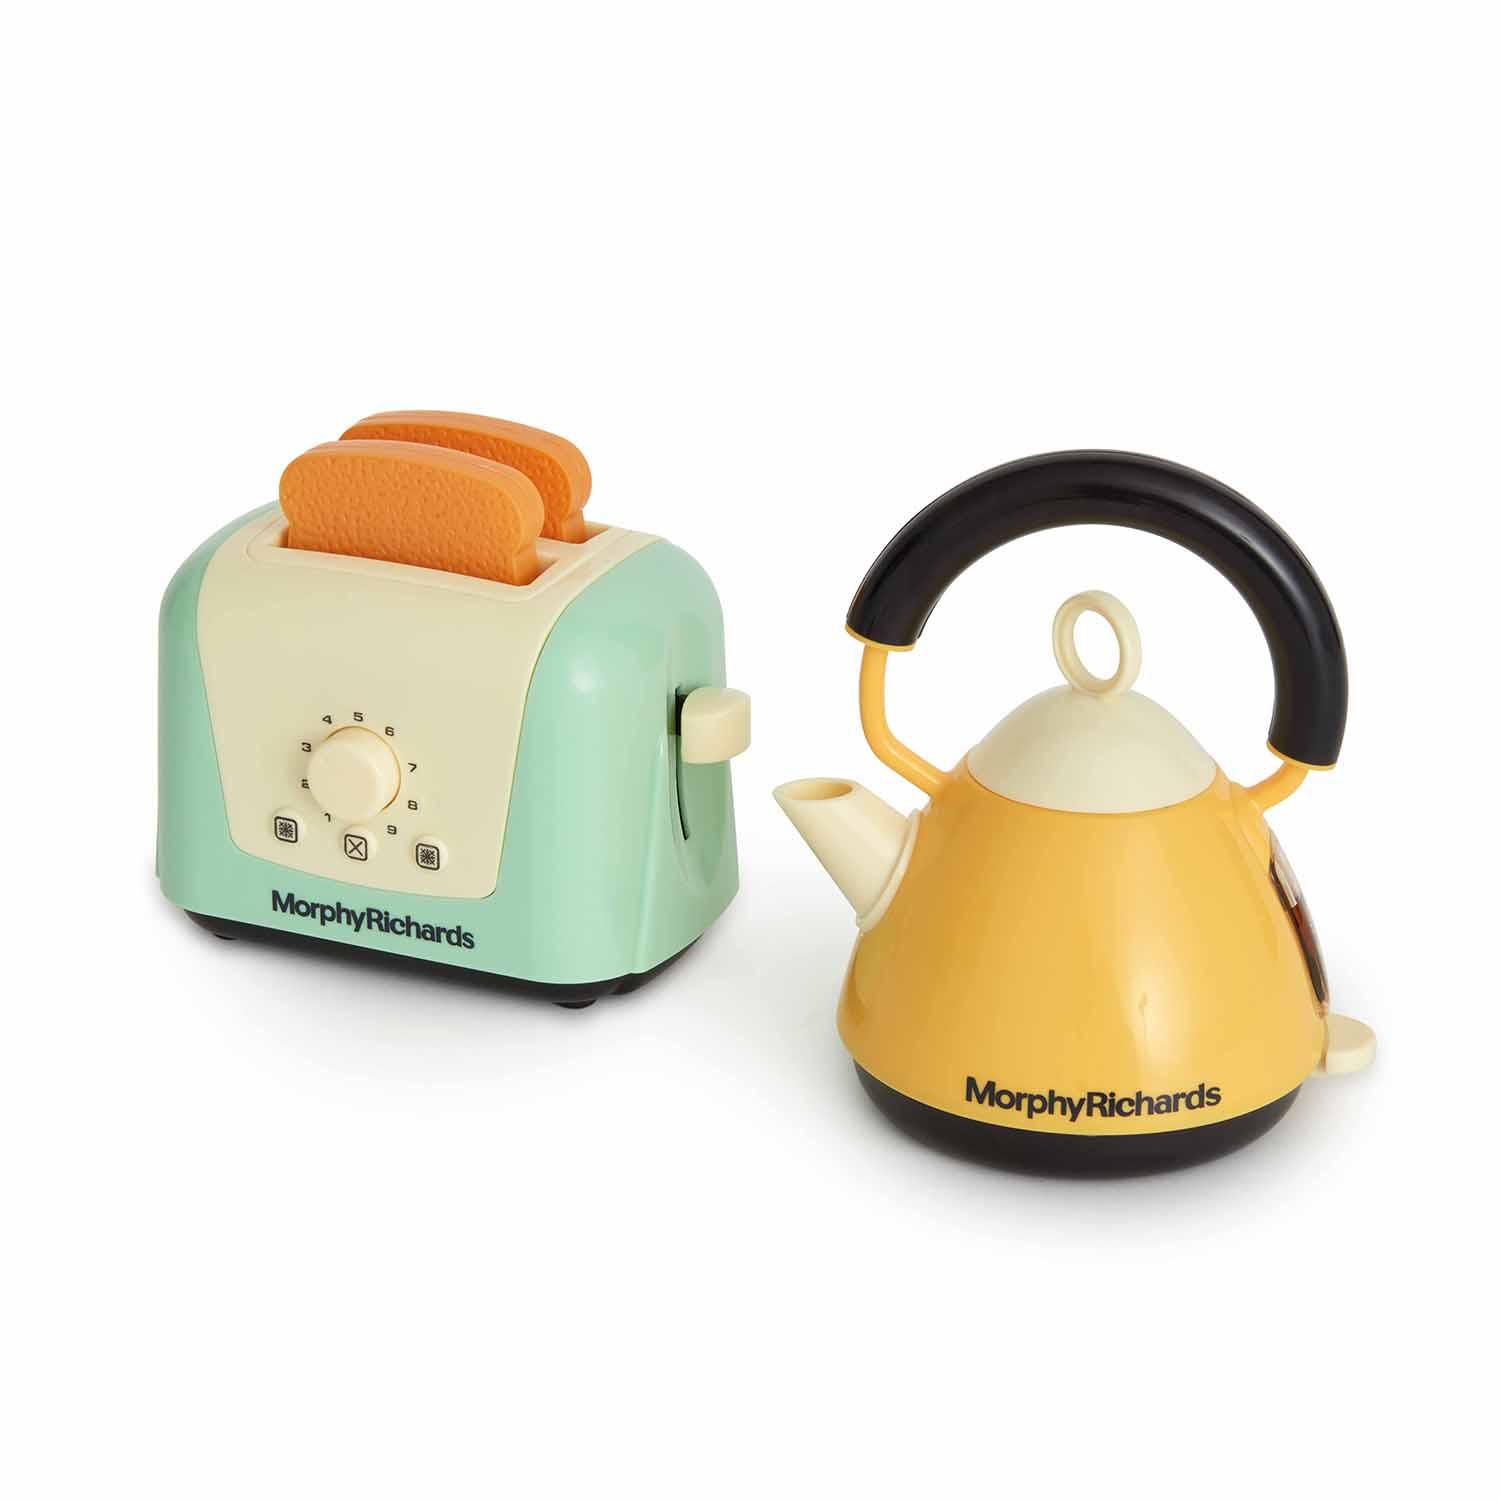 Morphy Richards Morphy Richards Children's Toaster Set Kitchen Appliance Roleplay Toy New Pop Up 